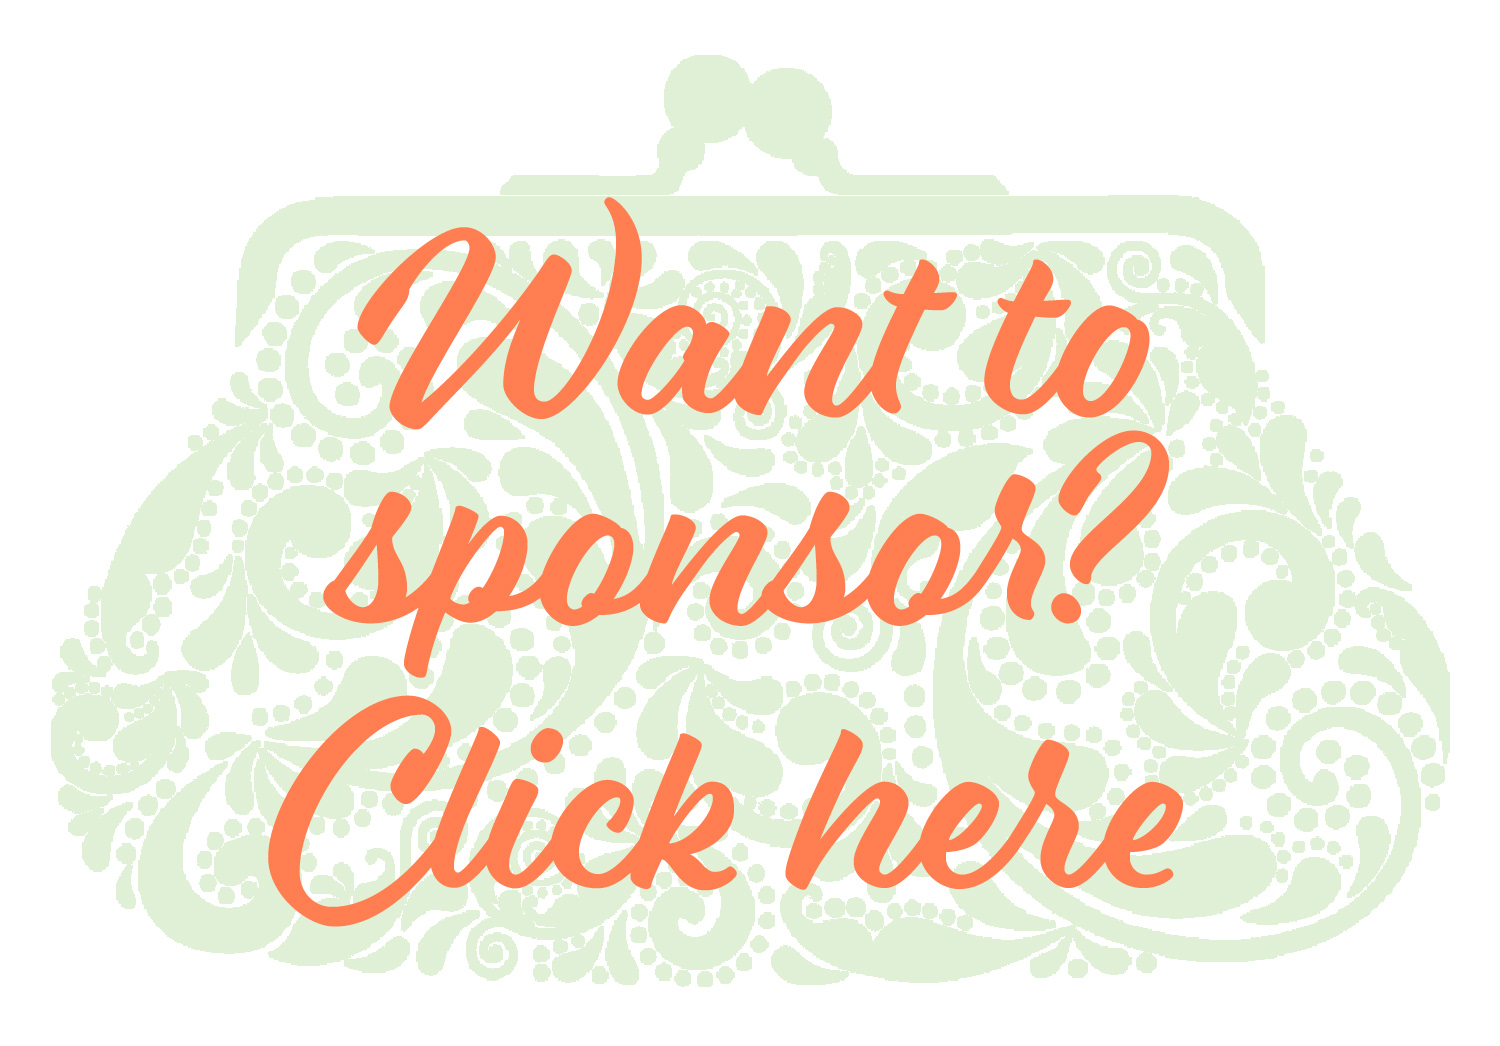 Click here to pay for sponsorships